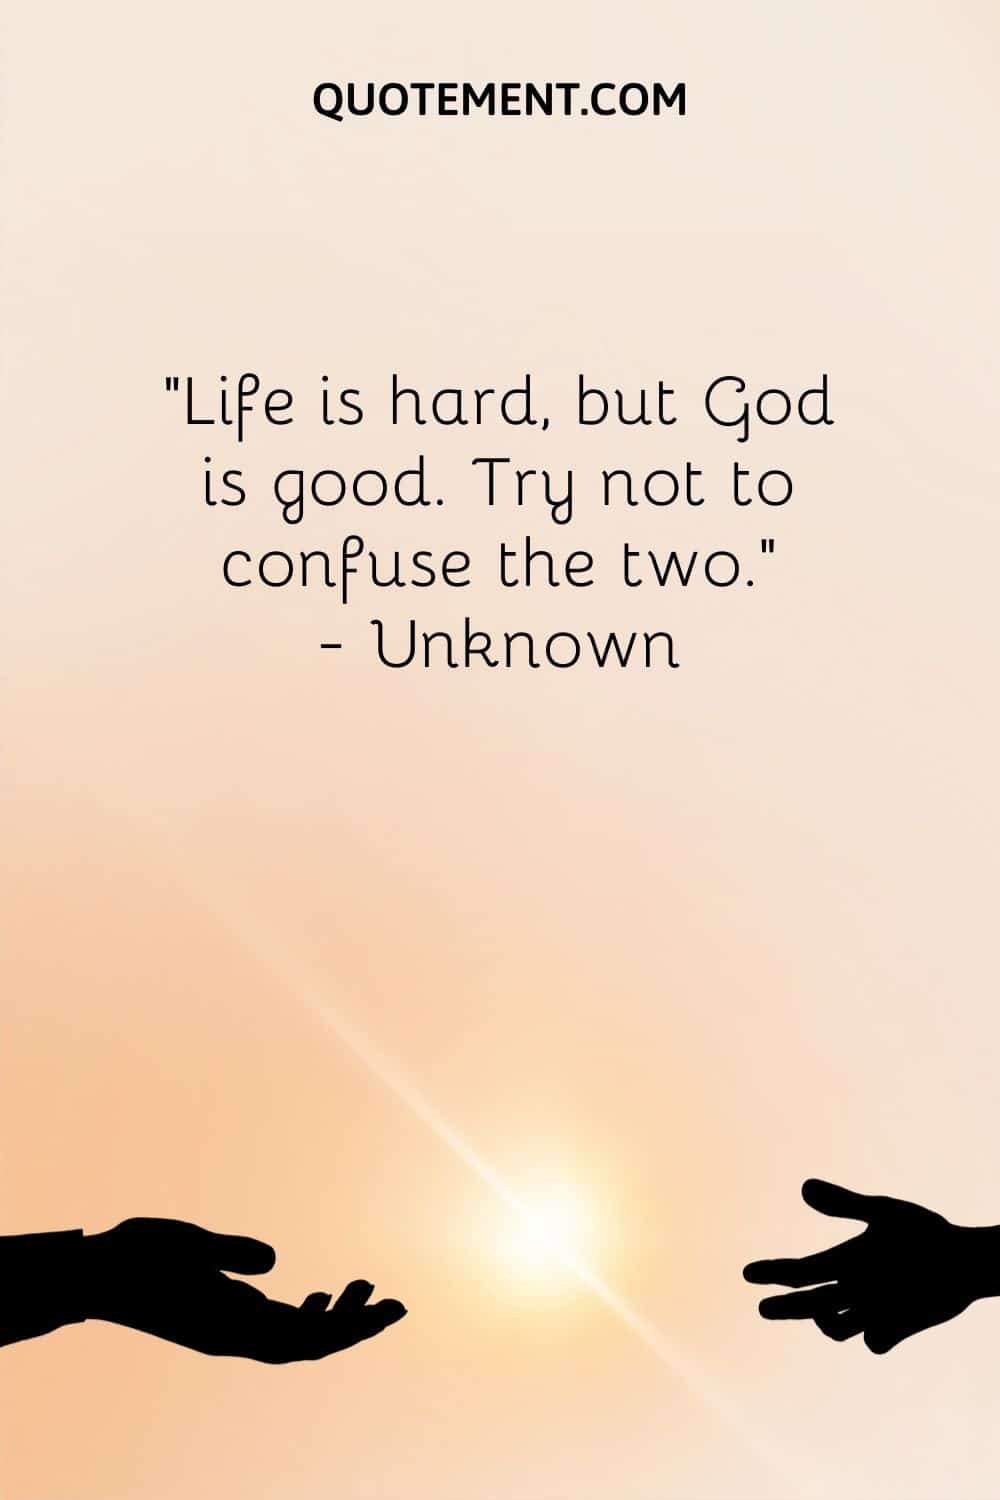 “Life is hard, but God is good. Try not to confuse the two.” — Unknown